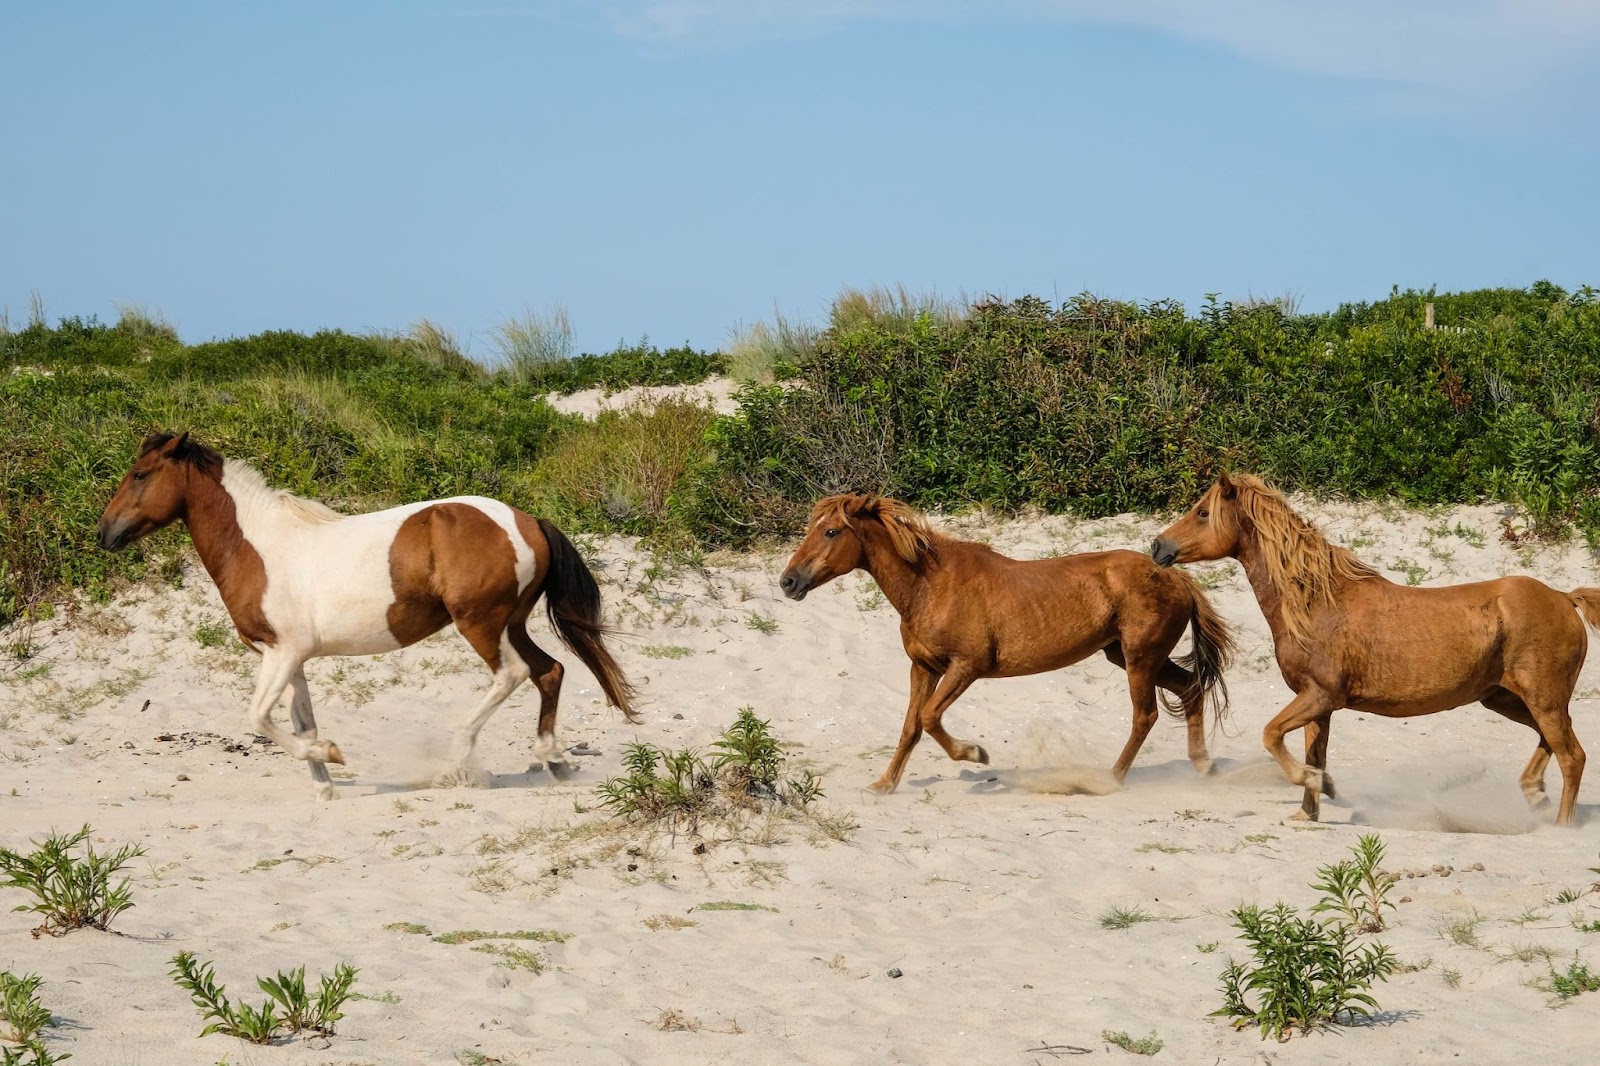 Two brown horses along with a white and brown horse run on a sandy beach with greenery in the background.